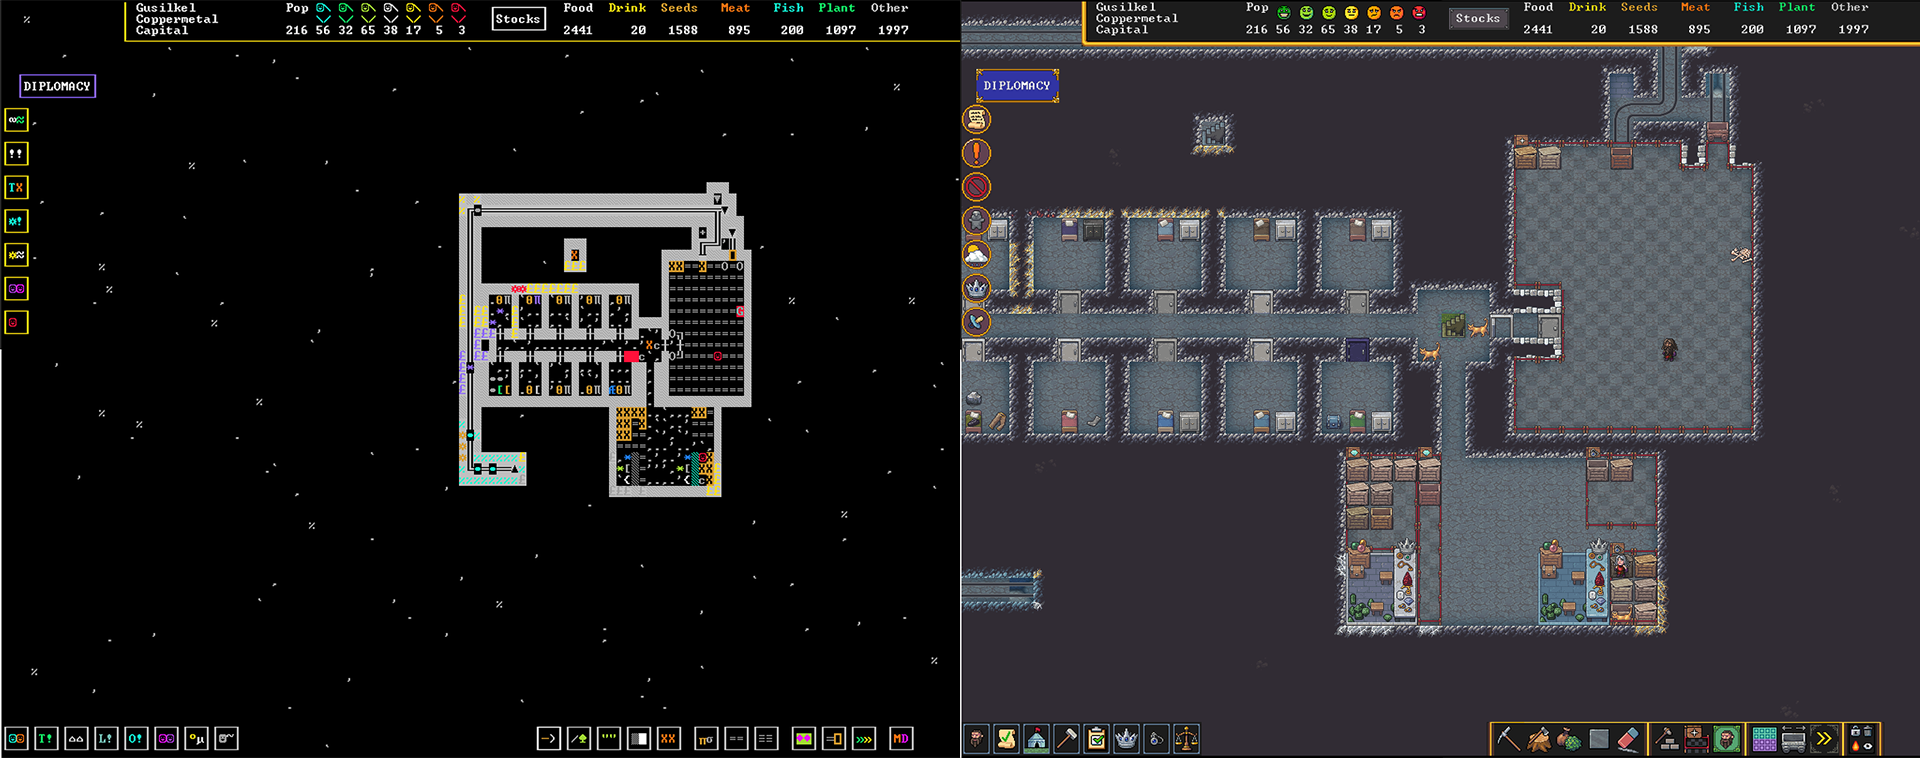 A comparison image of Dwarf Fortress with ASCII Glyph graphics against the modern tileset